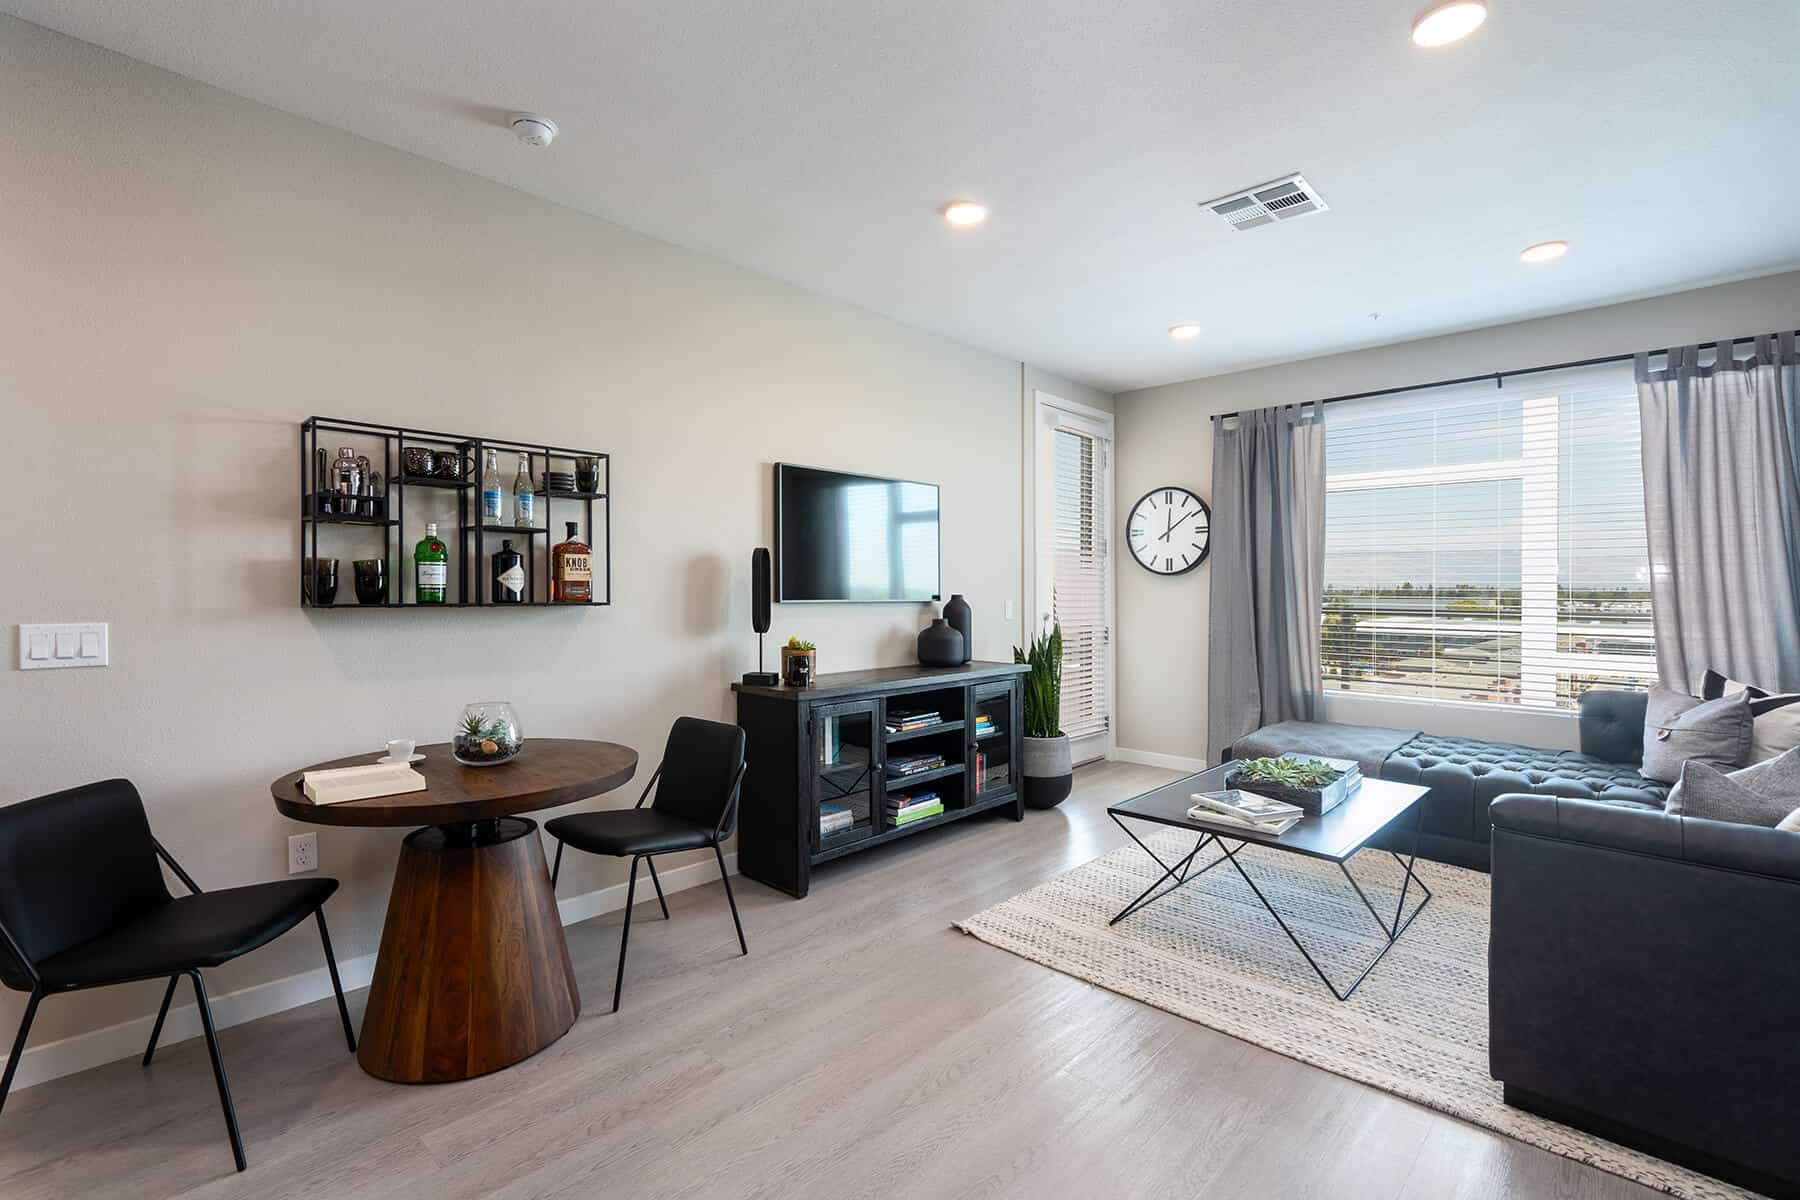 Pet-Friendly Apartments in Santa Clara CA - Prado-Sares-Regis - Spacious Living Room with Wood-Style Flooring, Large Window, and Access to Private Patio